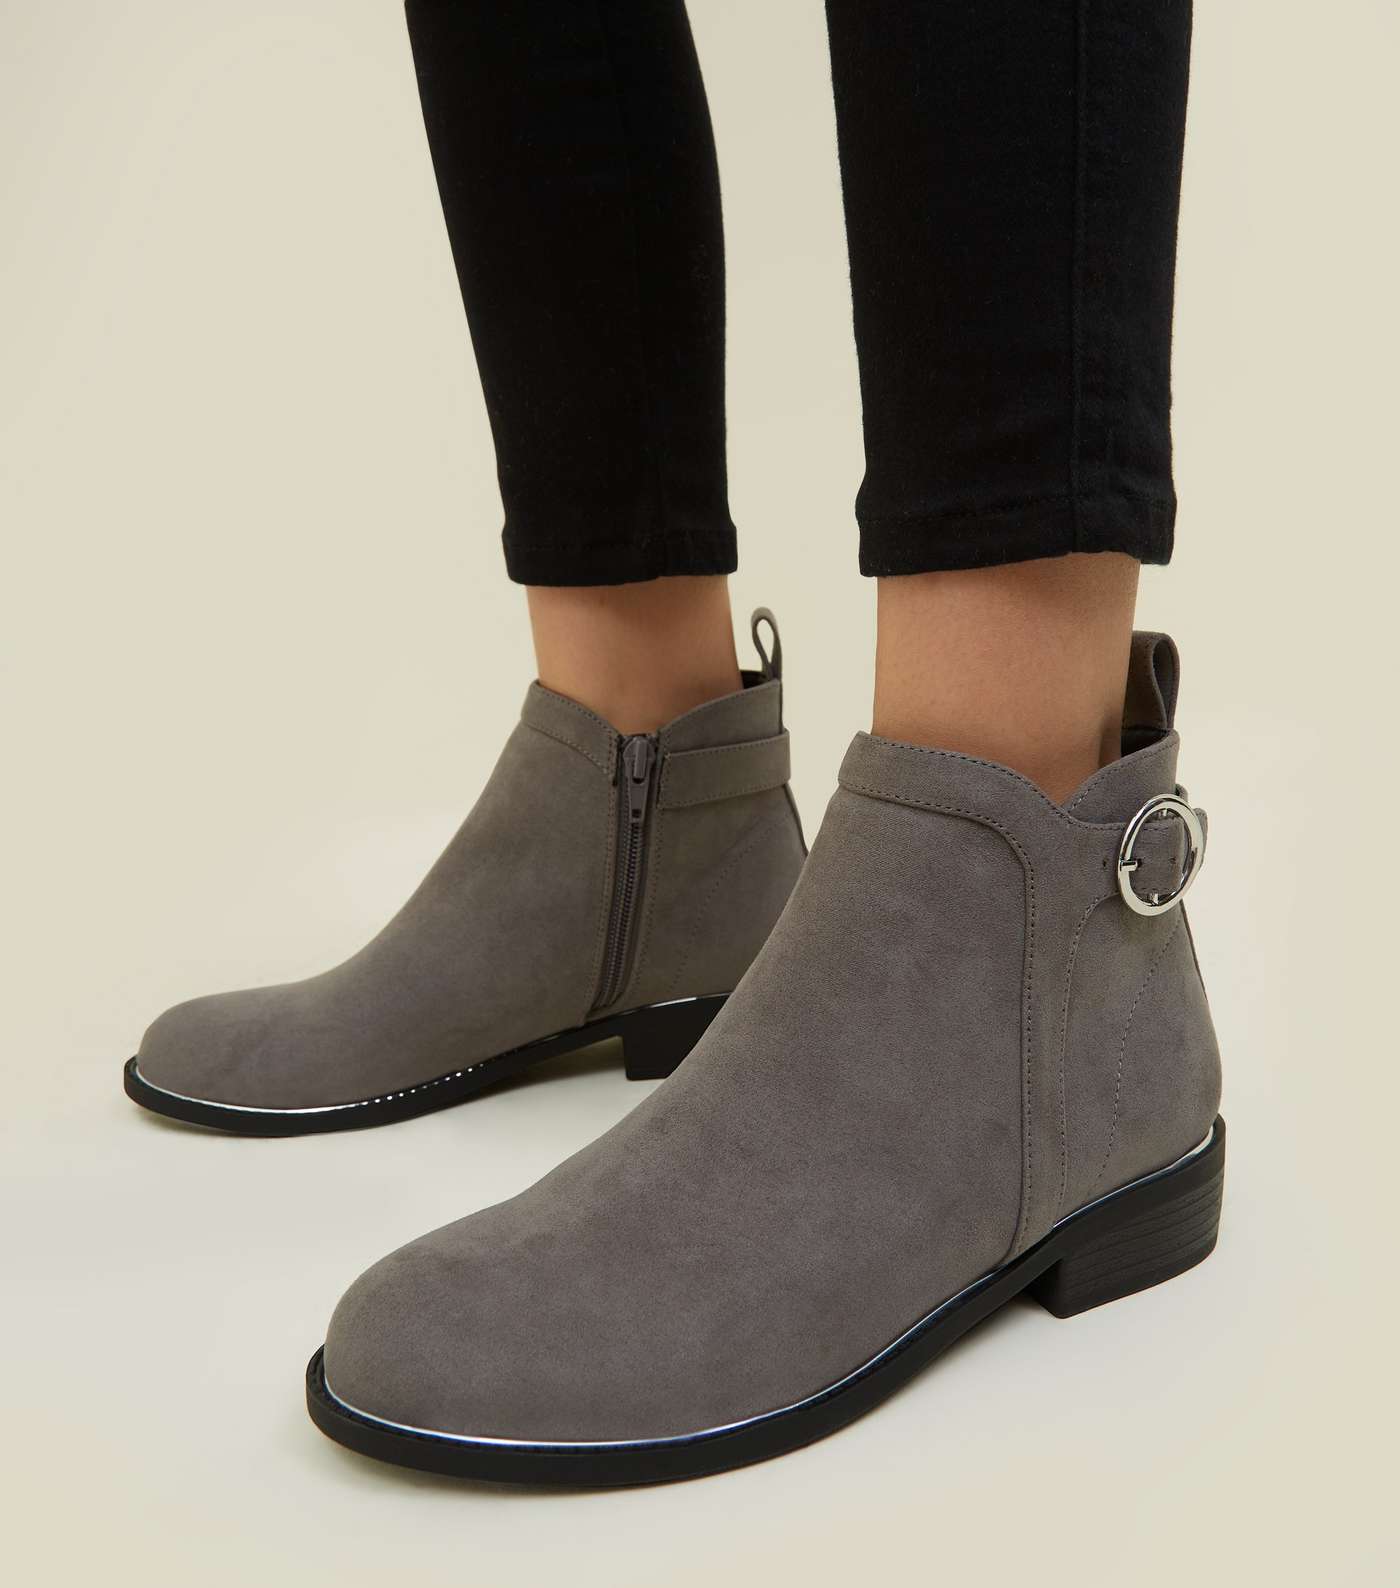 Girls Grey Suedette Ring Strap Ankle Boots Image 2